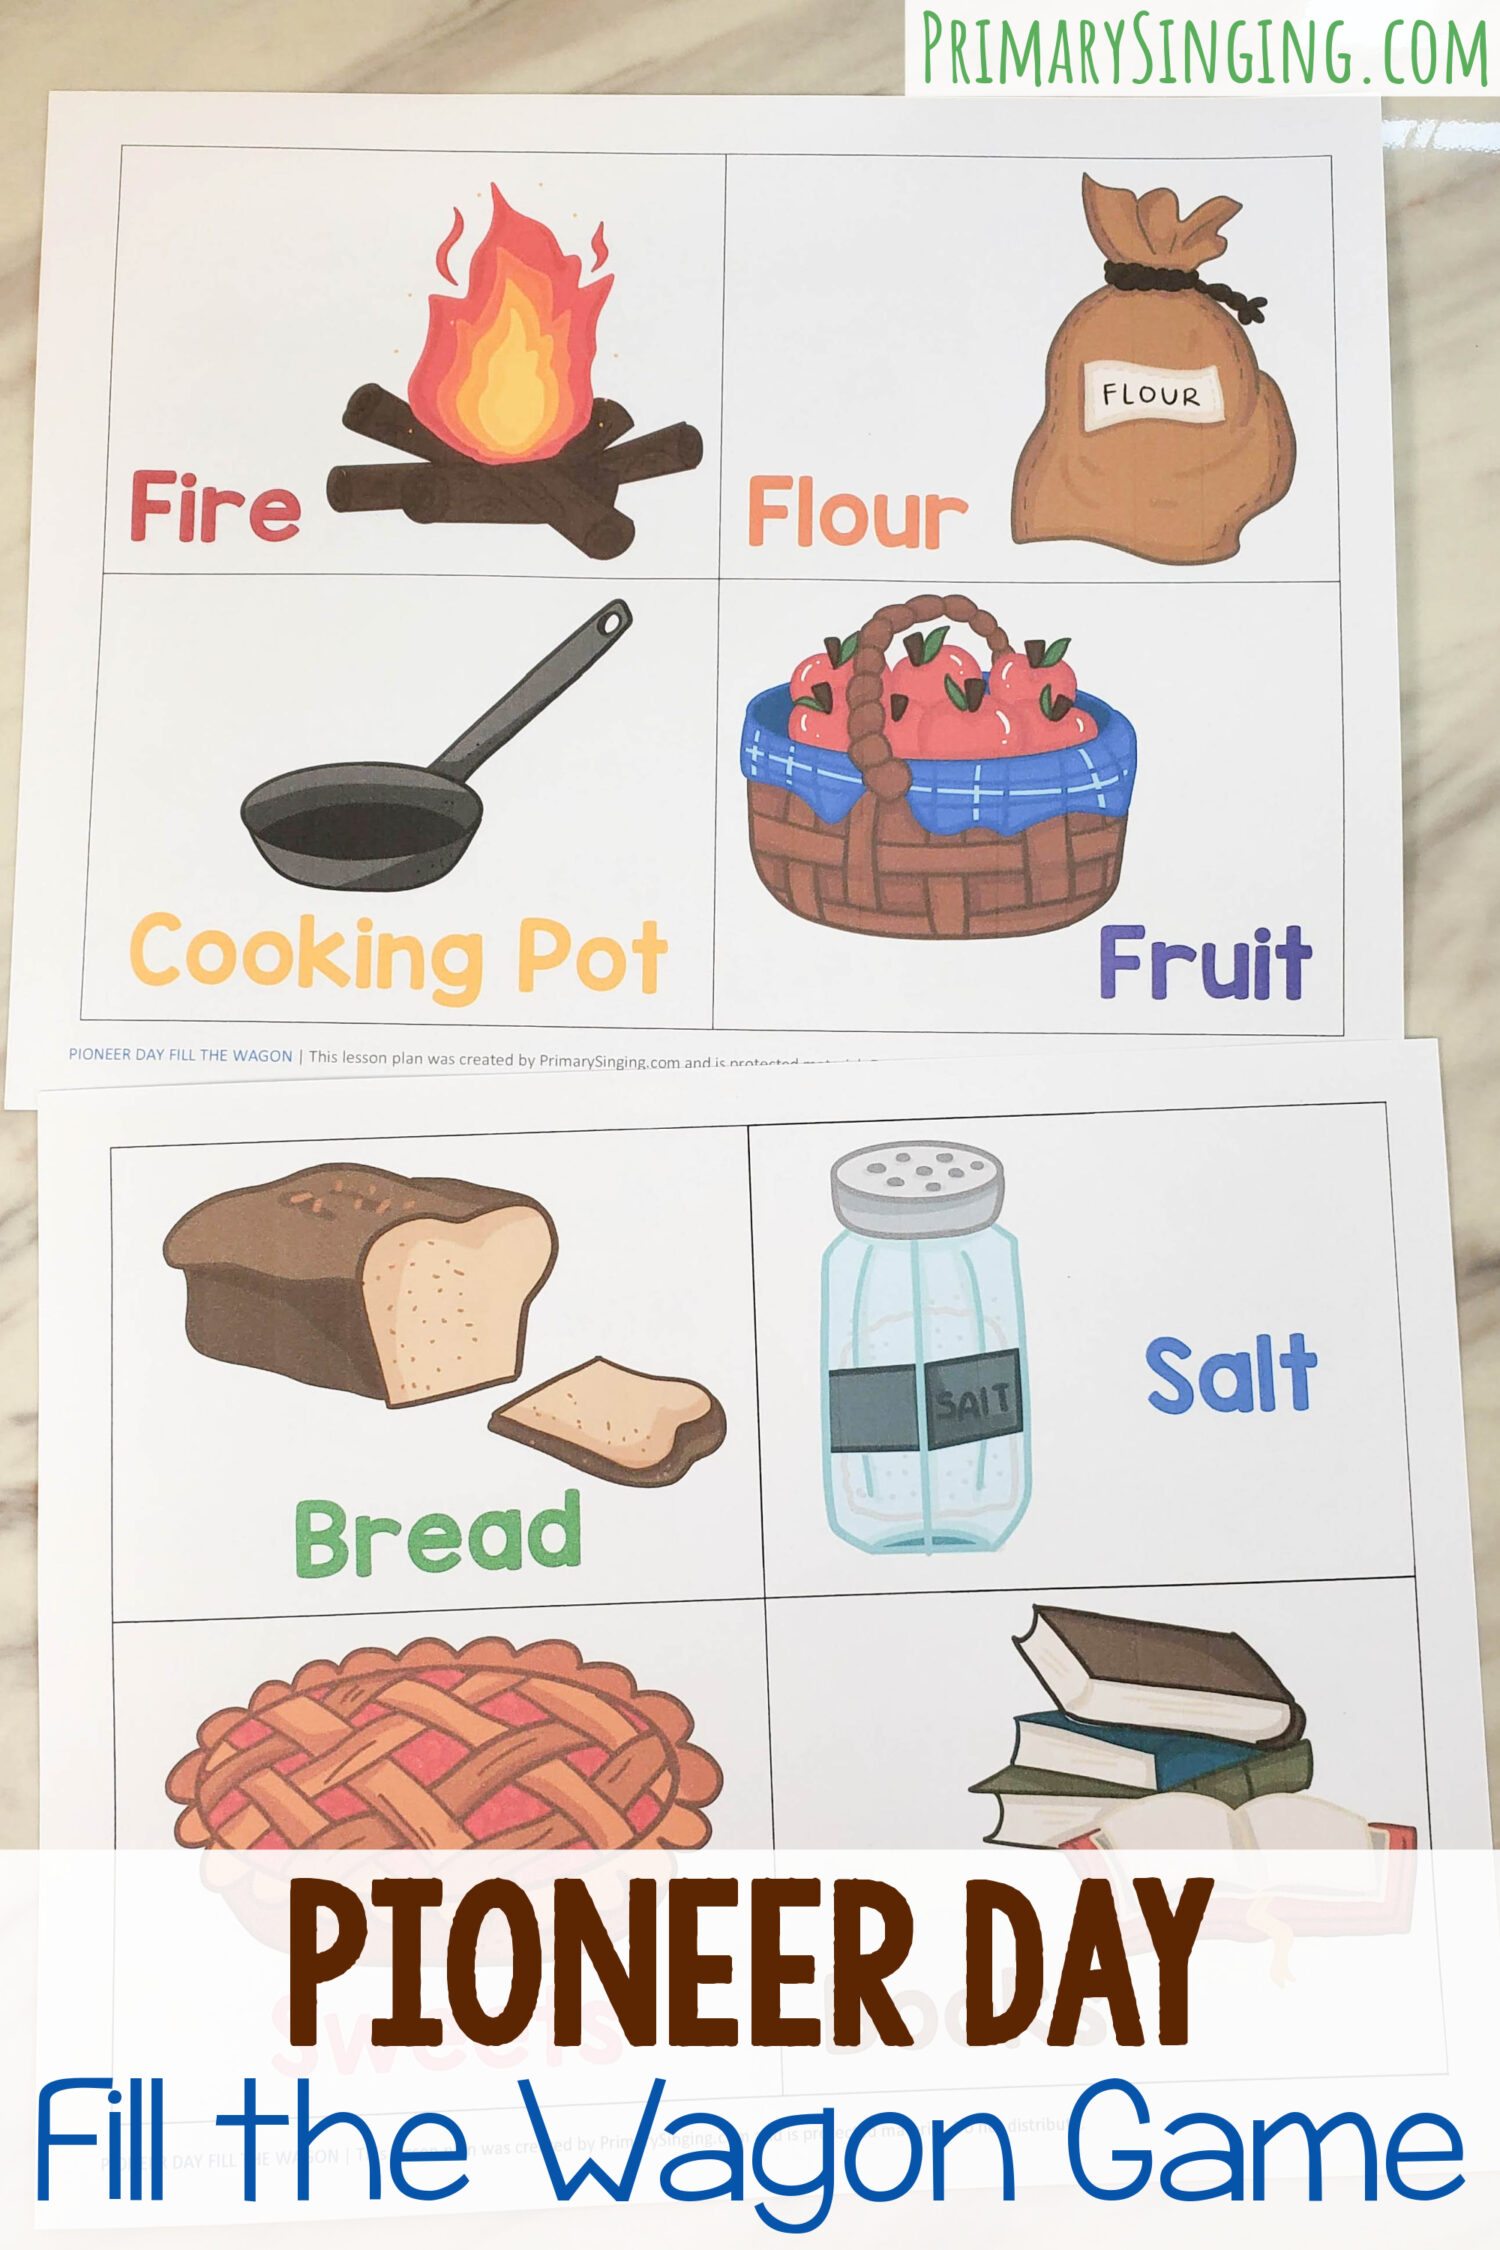 Pioneer Day singing time activity - Fill the Wagon game! Use this cute assortment of supplies the pioneers would have needed to pack before heading out on the Mormon Trail. The kids can make the tough choices of what to include, before time runs out! Then add a fun way to sing to coordinate. PDF Printable song helps for LDS Primary Music Leaders.